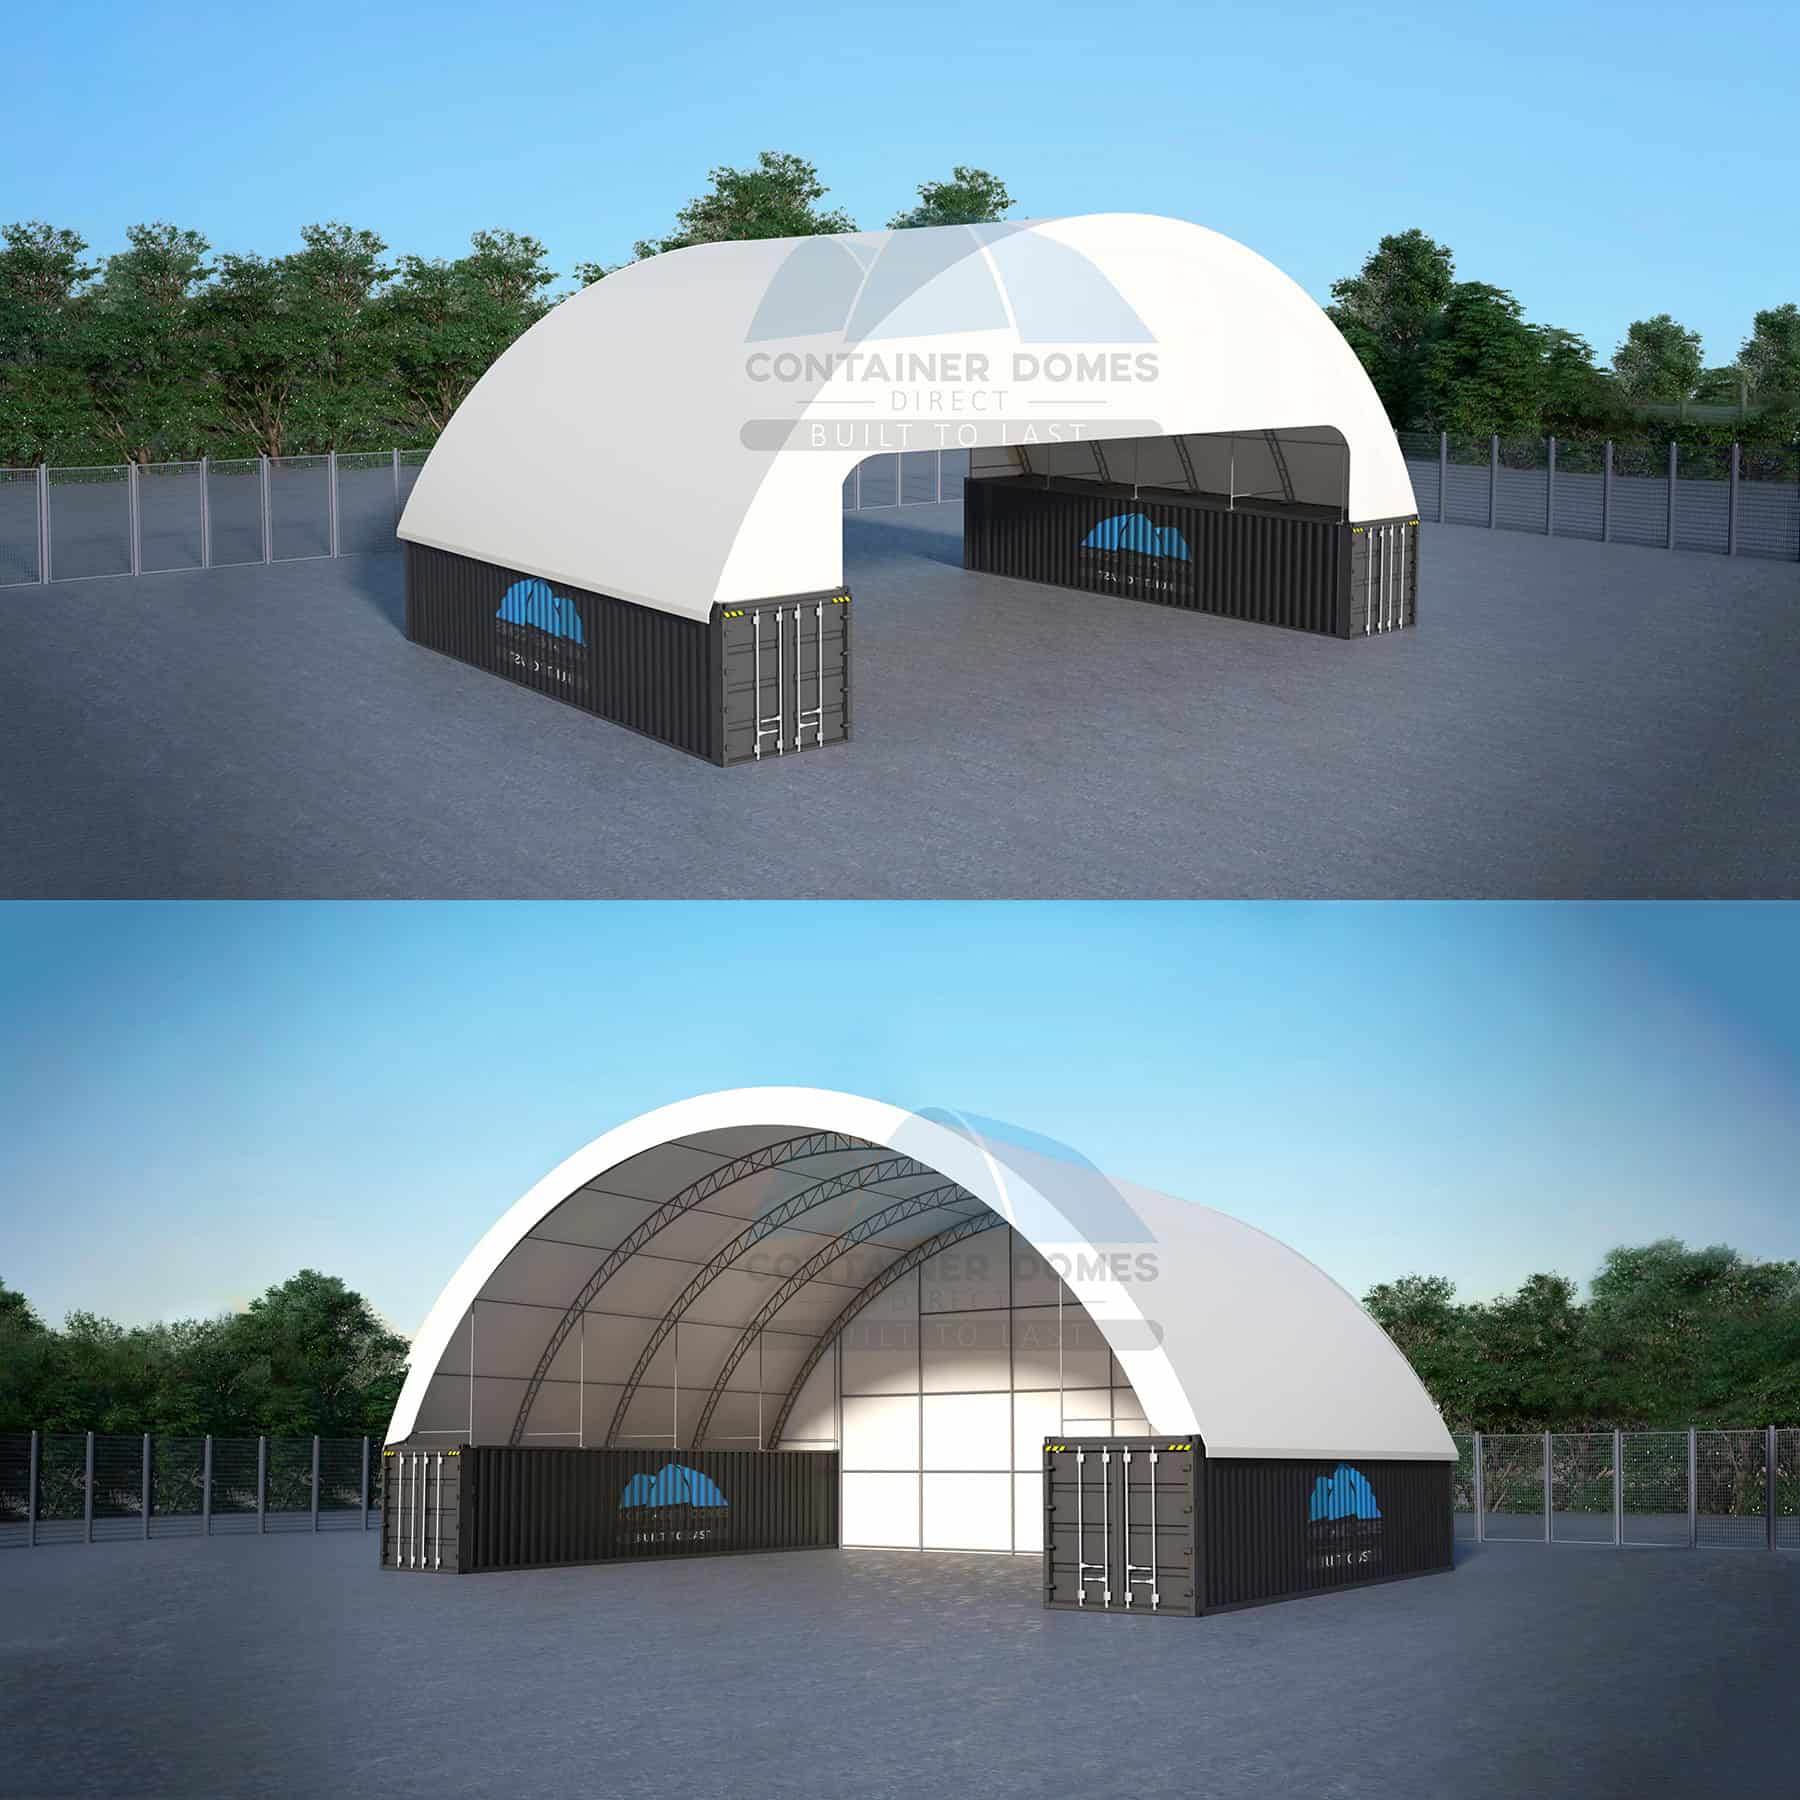 60x40ft Container Dome 18m X 12m New Design 2020 Container Domes